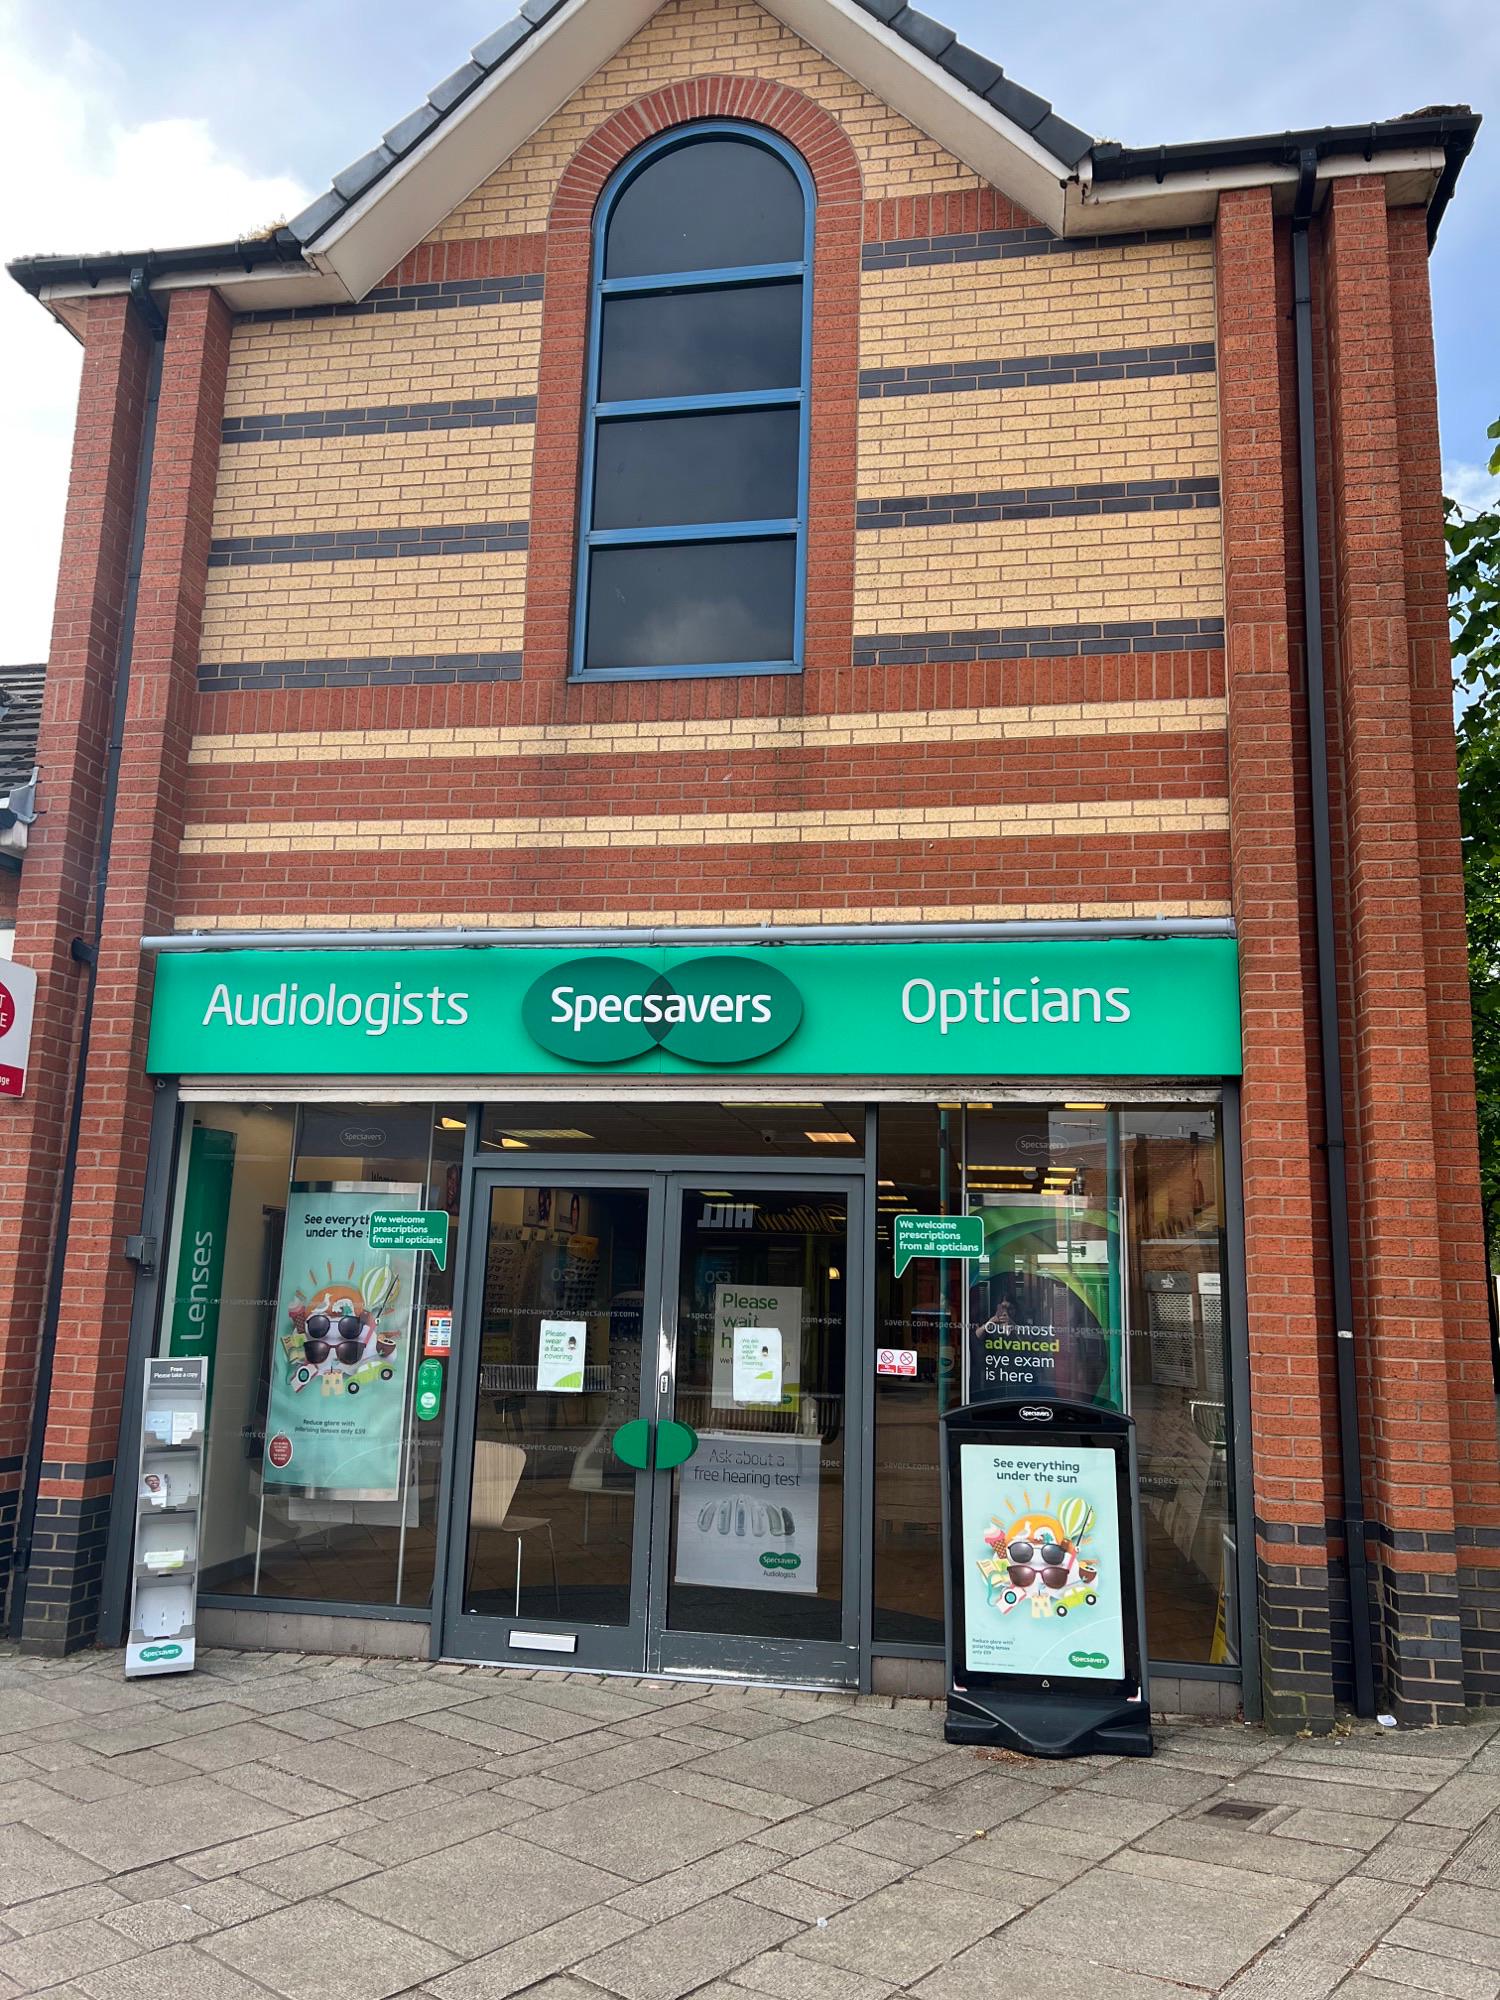 Images Specsavers Opticians and Audiologists - Huyton